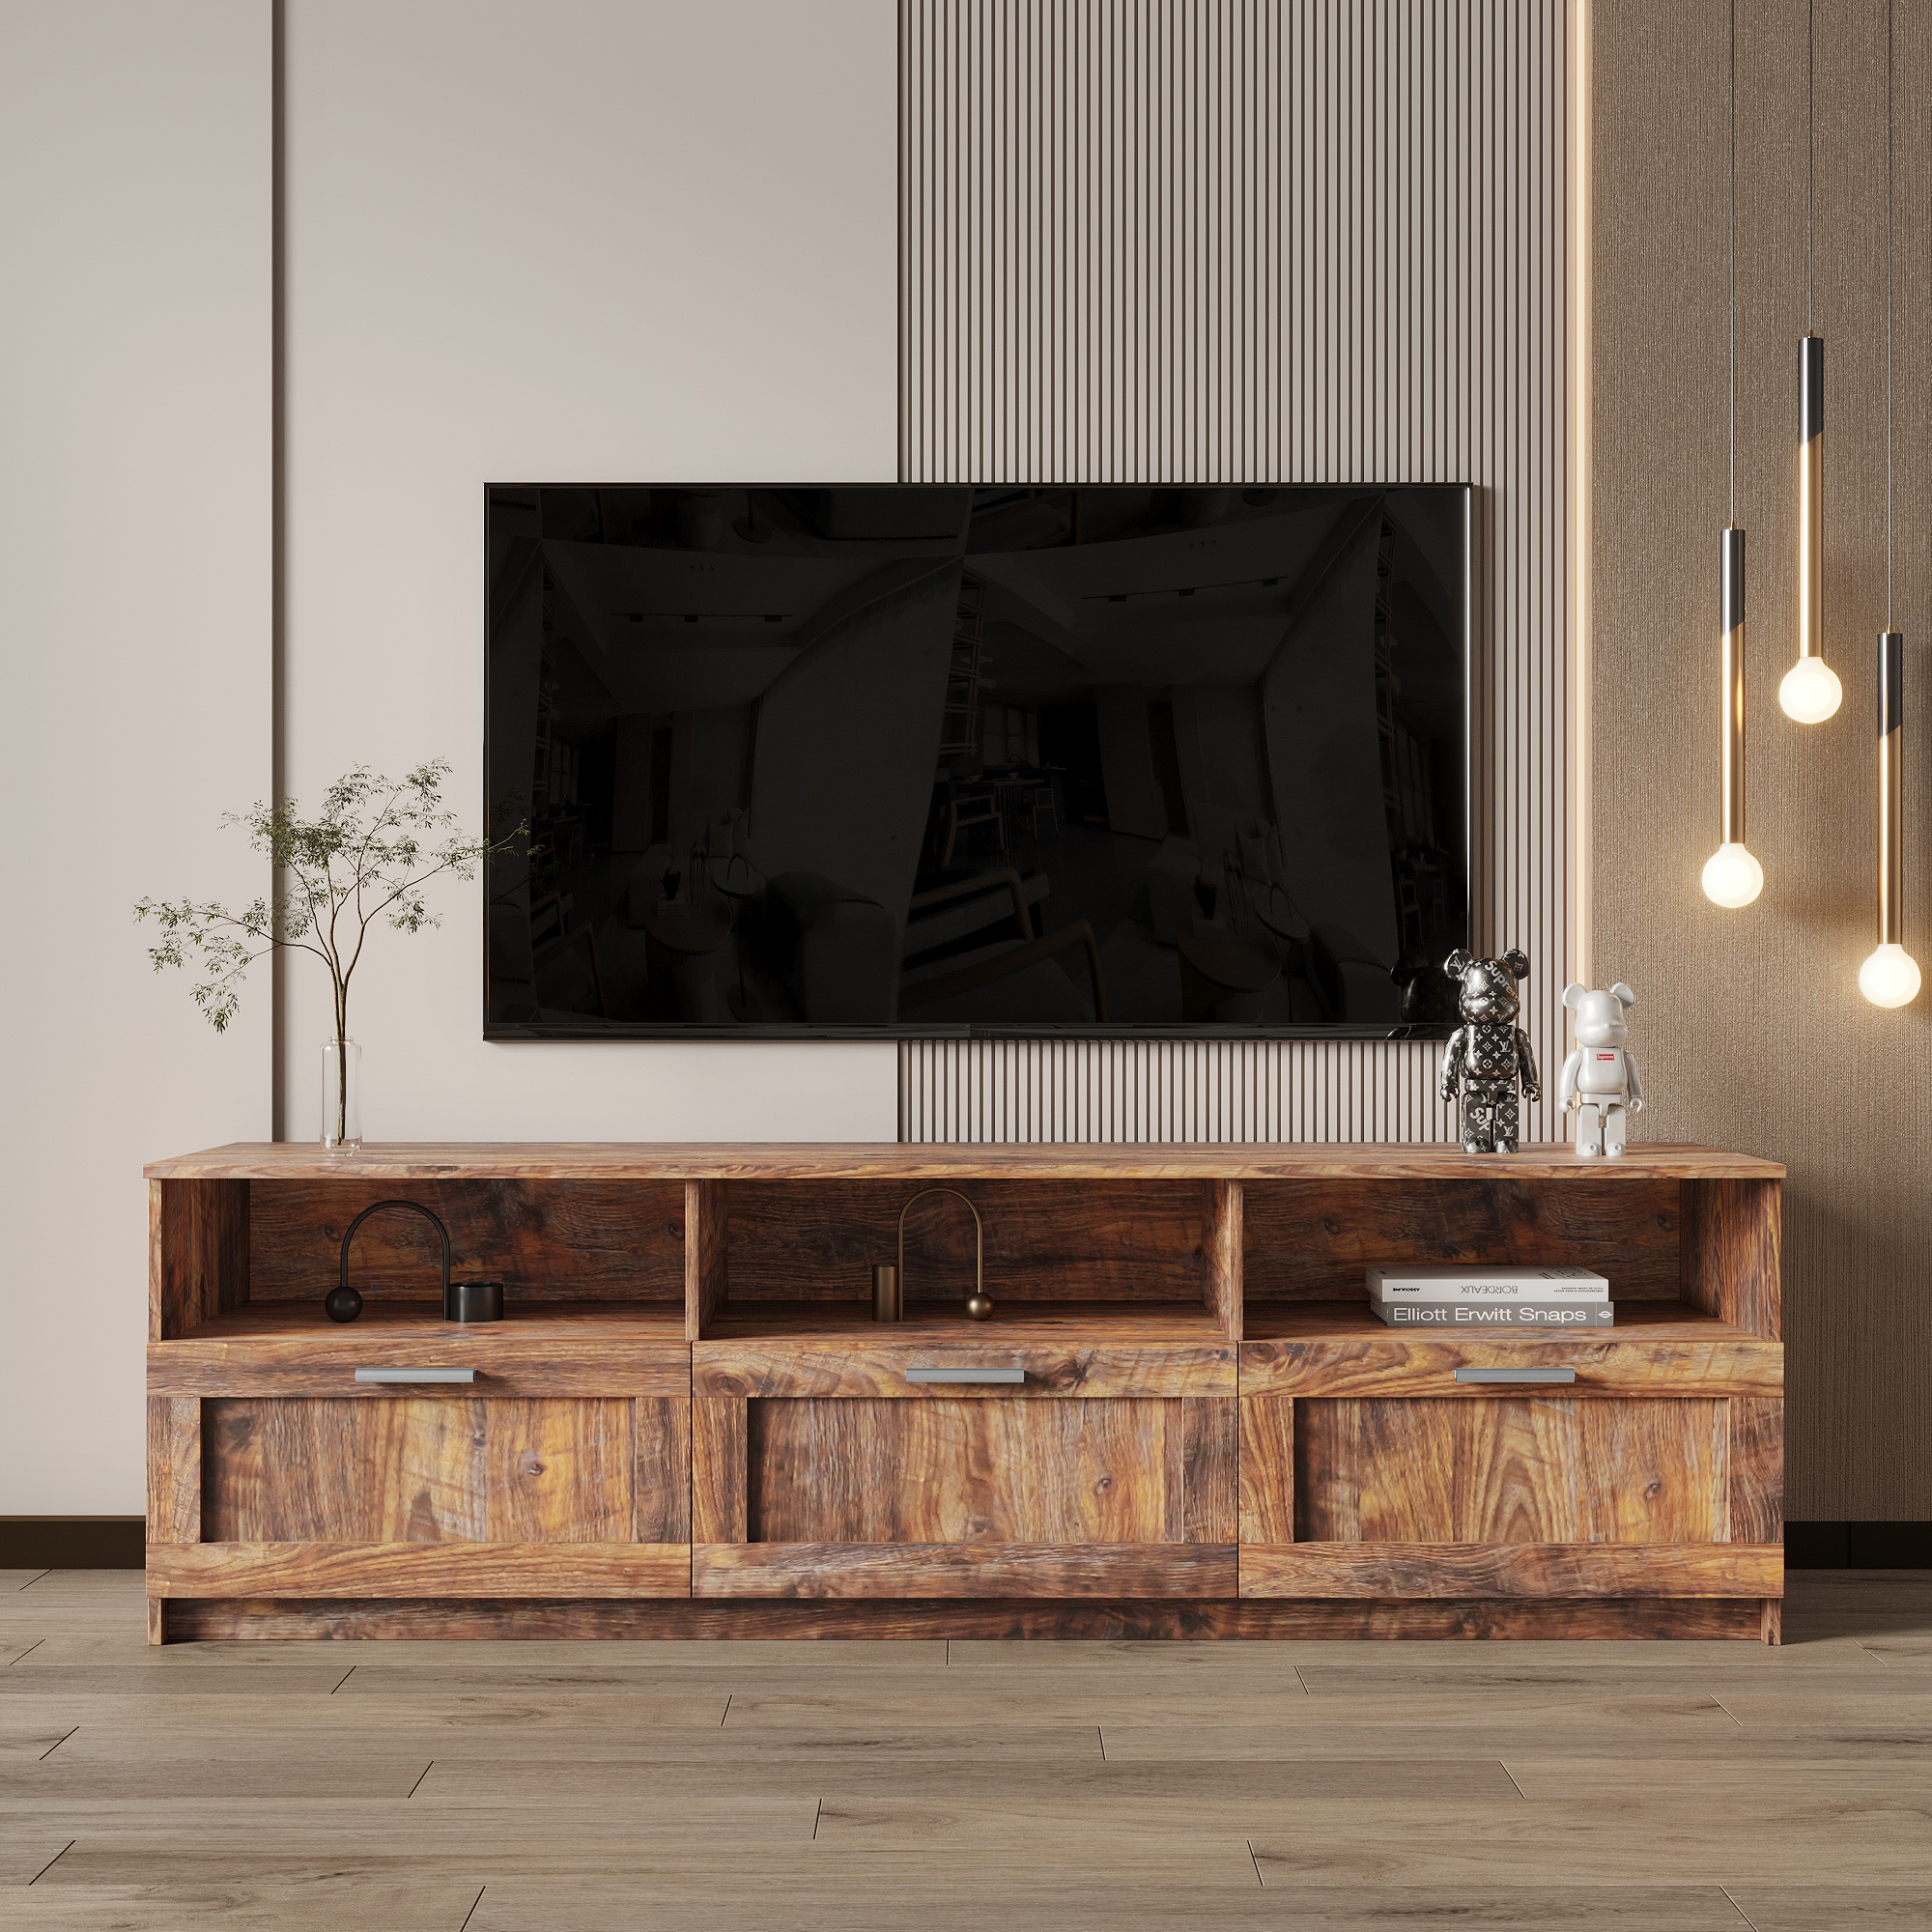 TV Unit: Buy TV Unit Online @Upto 60% OFF in India - Pepperfry